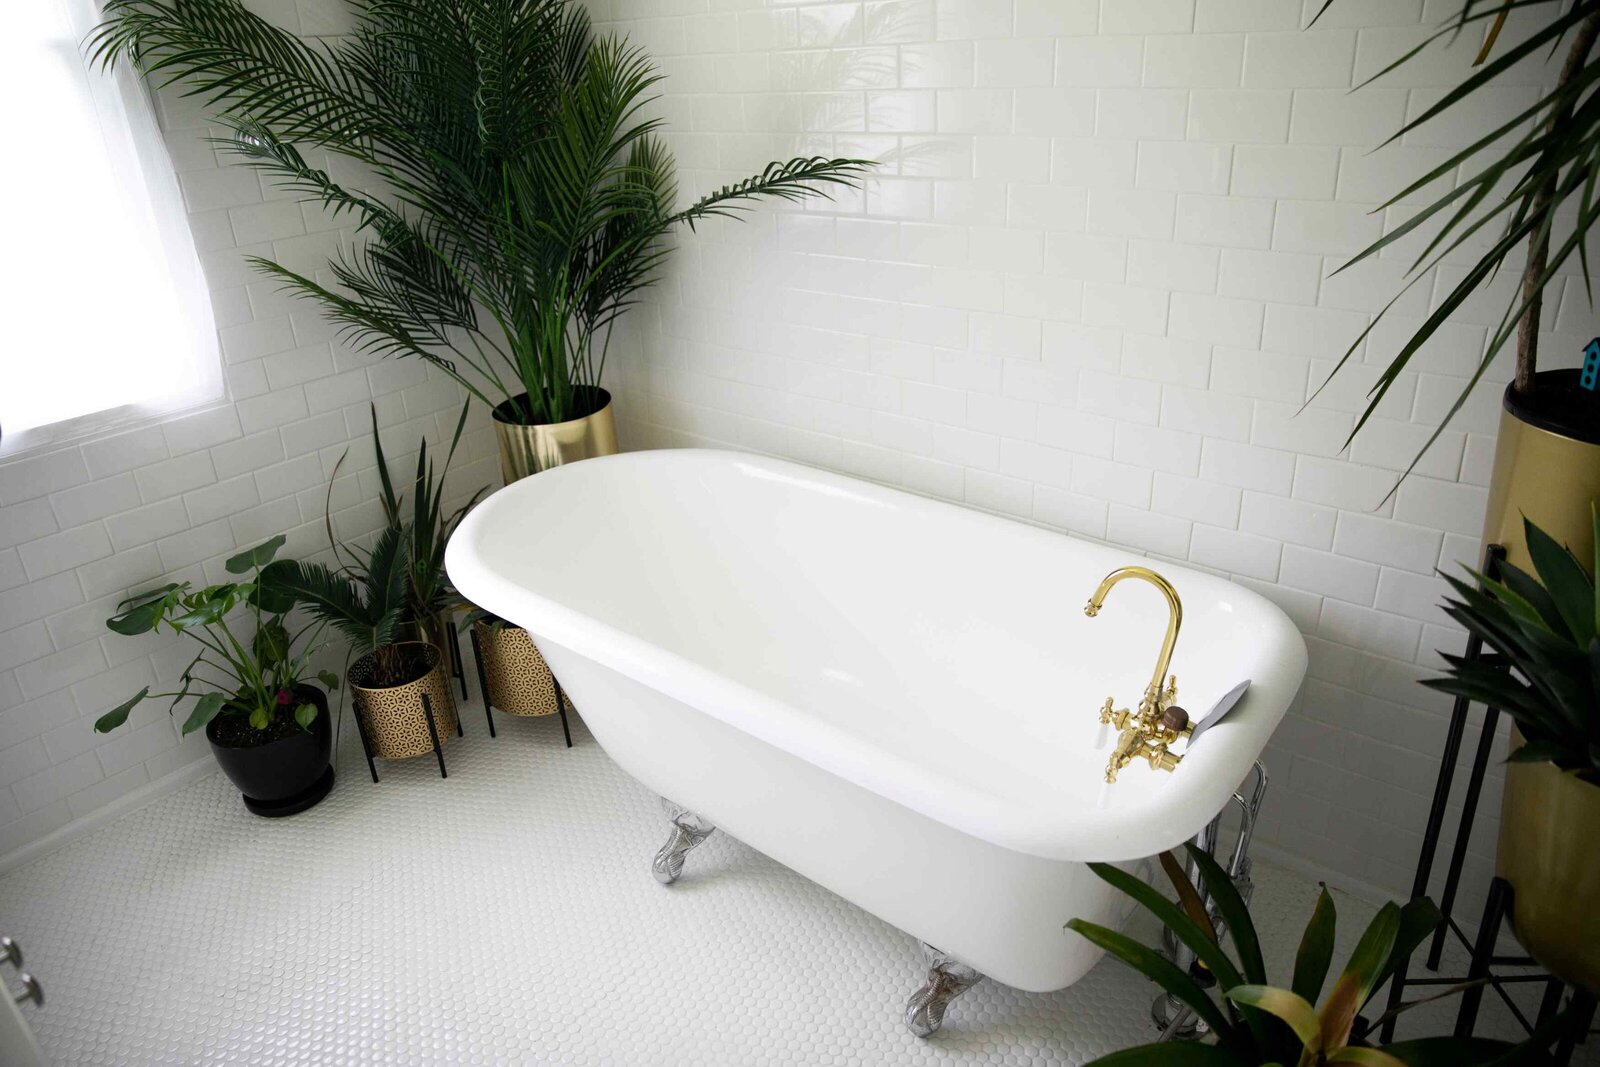 clawfoot tub with surrounding plants